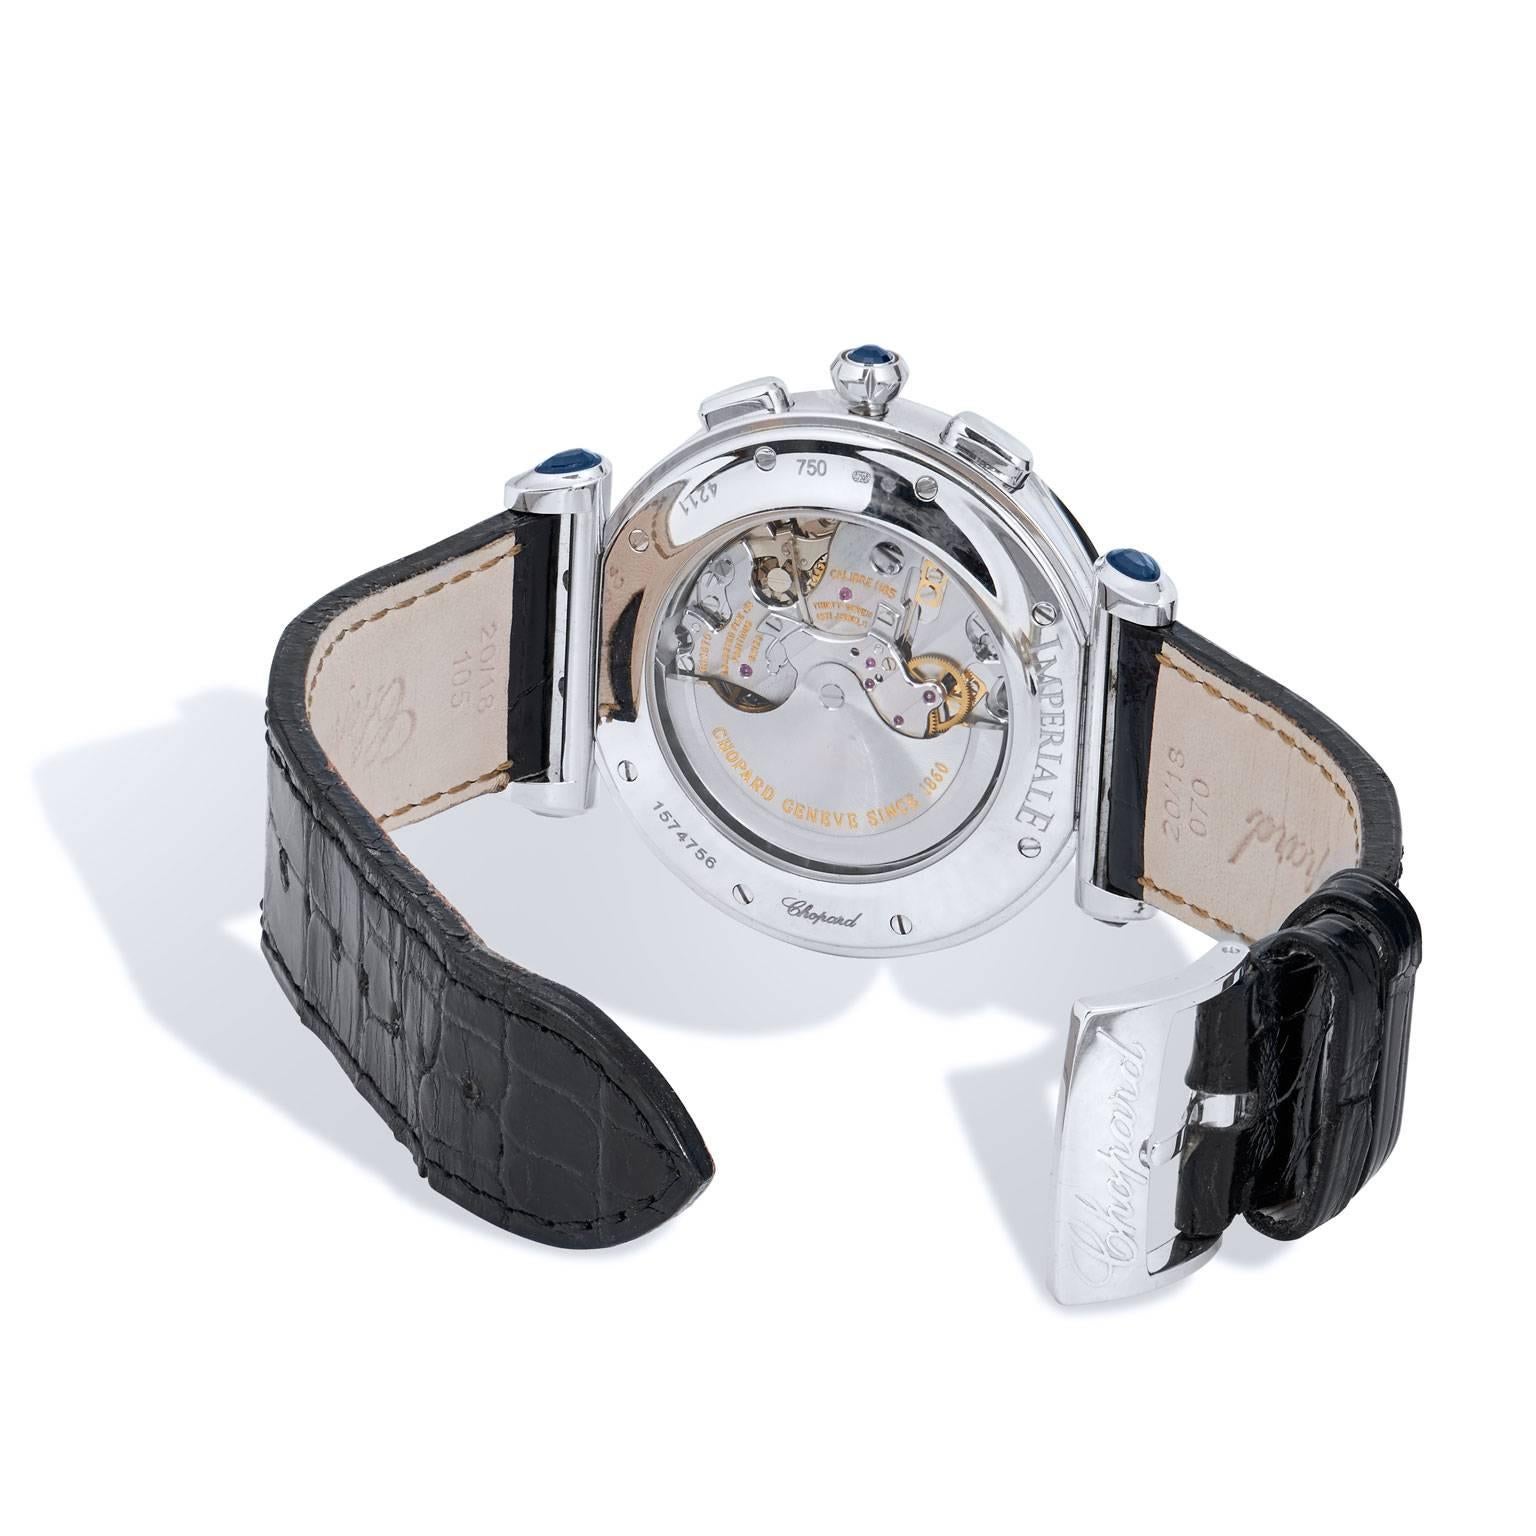 Modern Chopard Women's Imperiale 18 Karat White Gold and Diamond Collection Watch